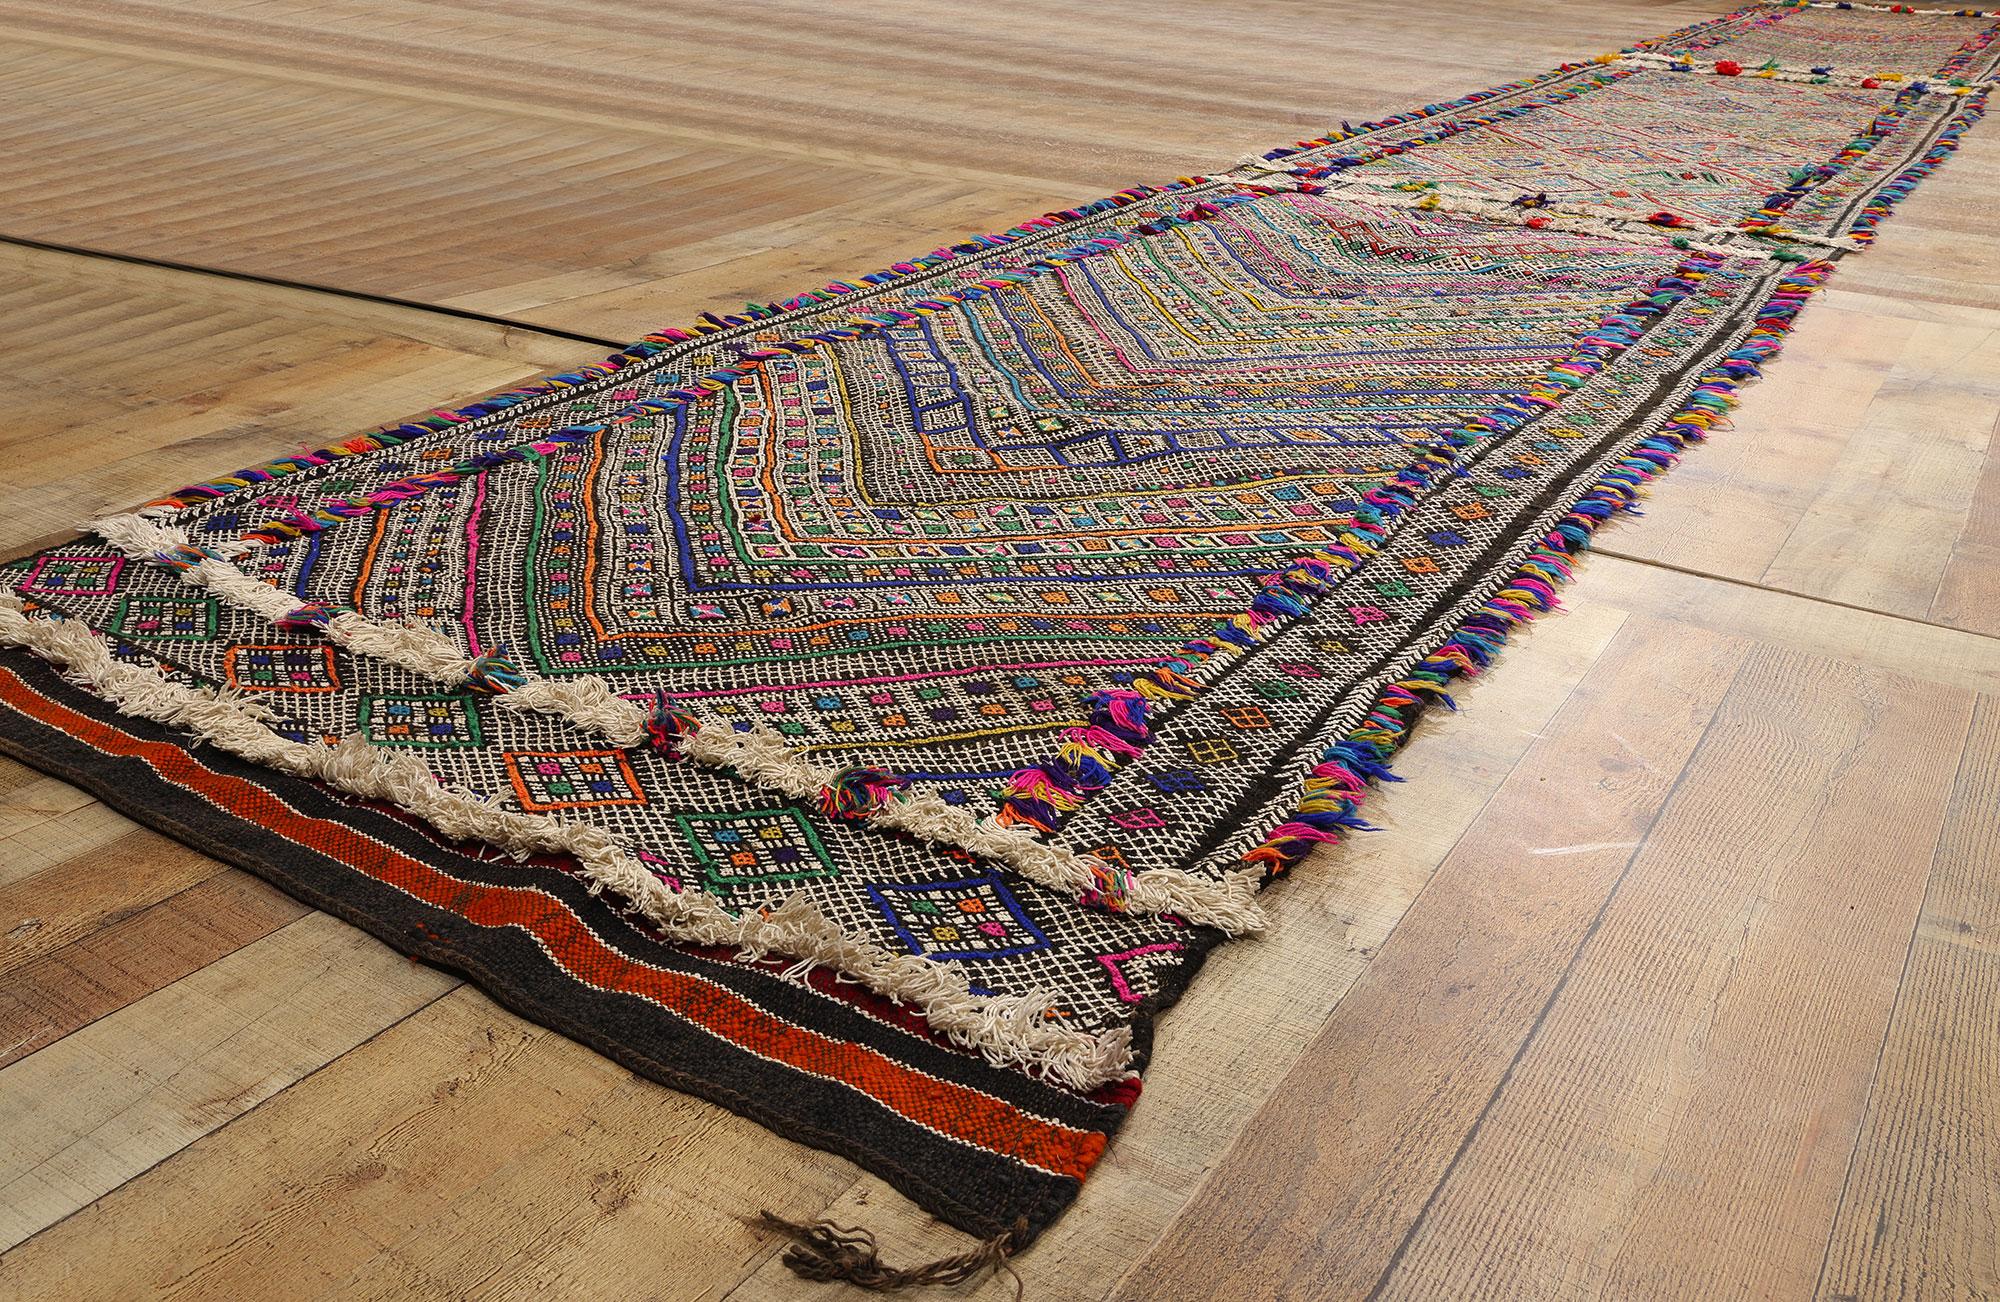 Hand-Woven Midcentury Bohemian Vintage Moroccan Zemmour Kilim Berber Rug, 03'08 x 26'02 For Sale